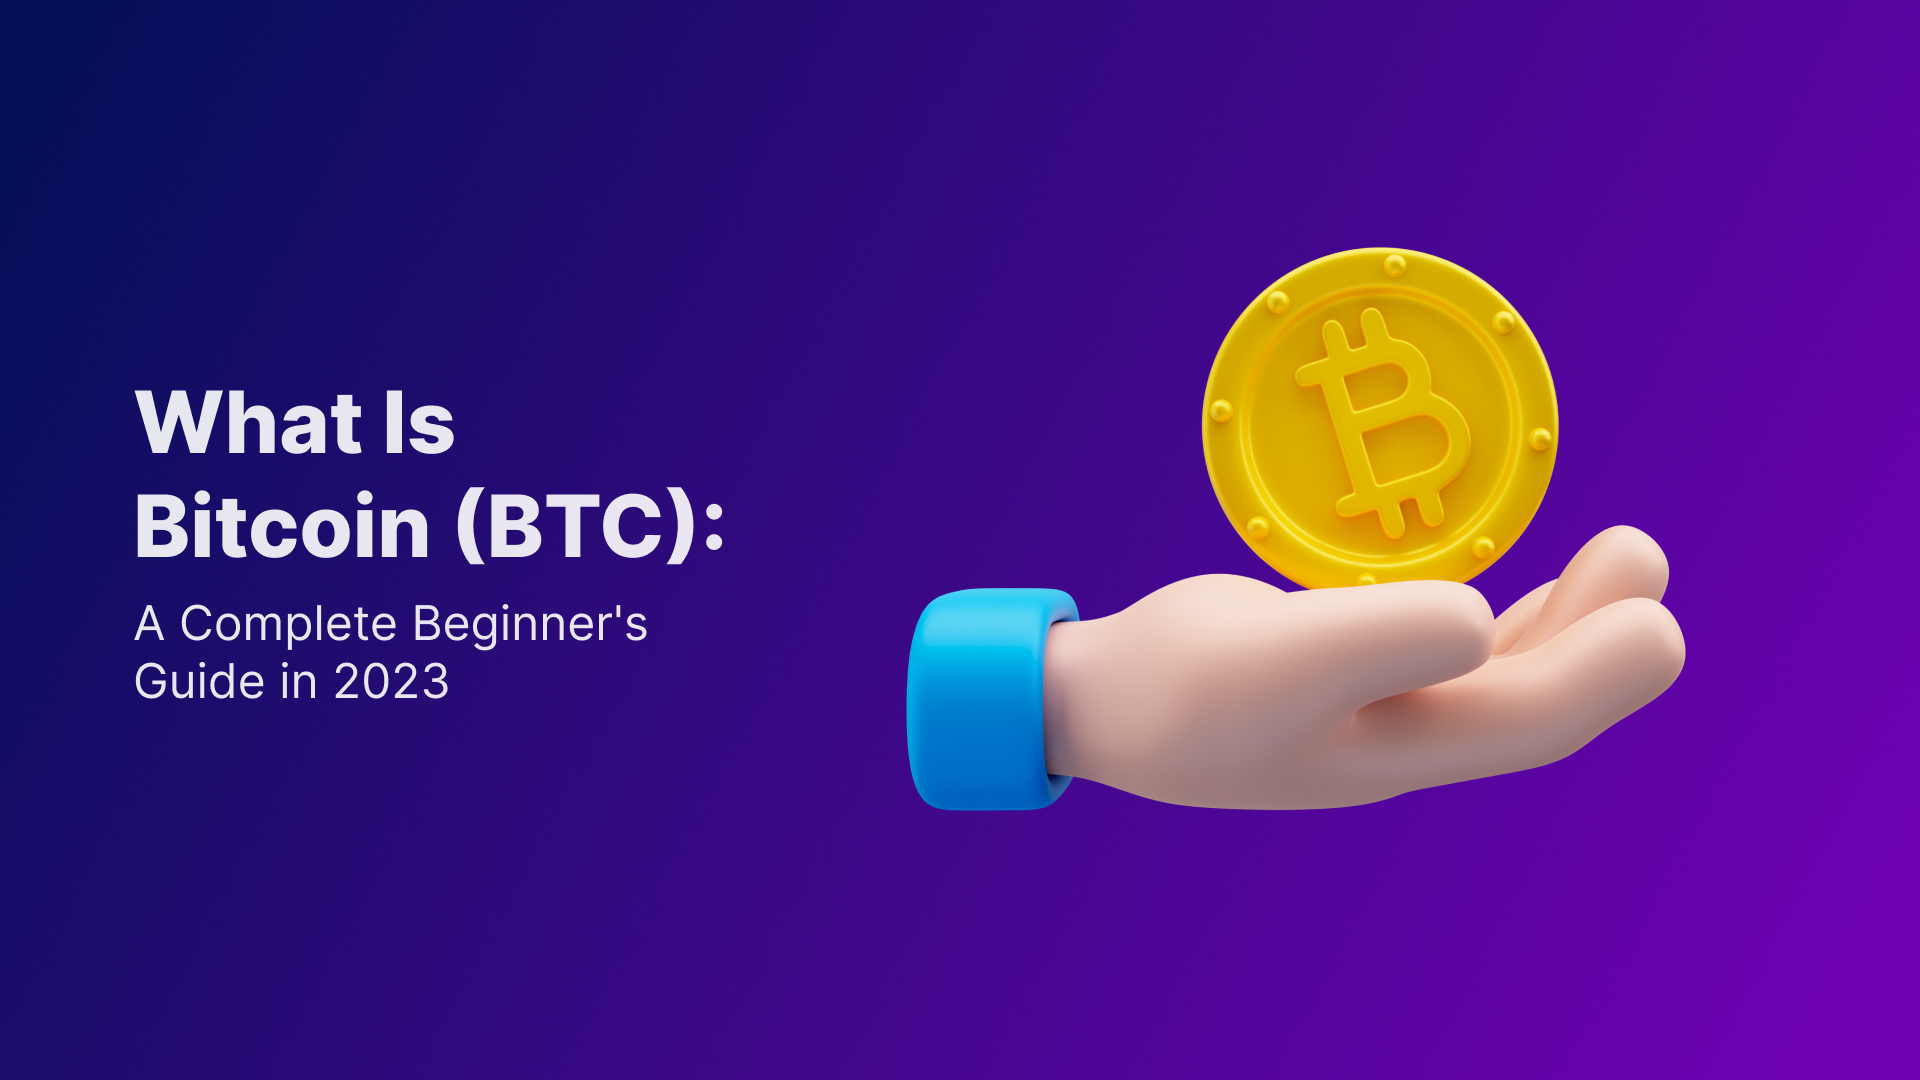 What Is Bitcoin (BTC): A Complete Beginner’s Guide in 2023